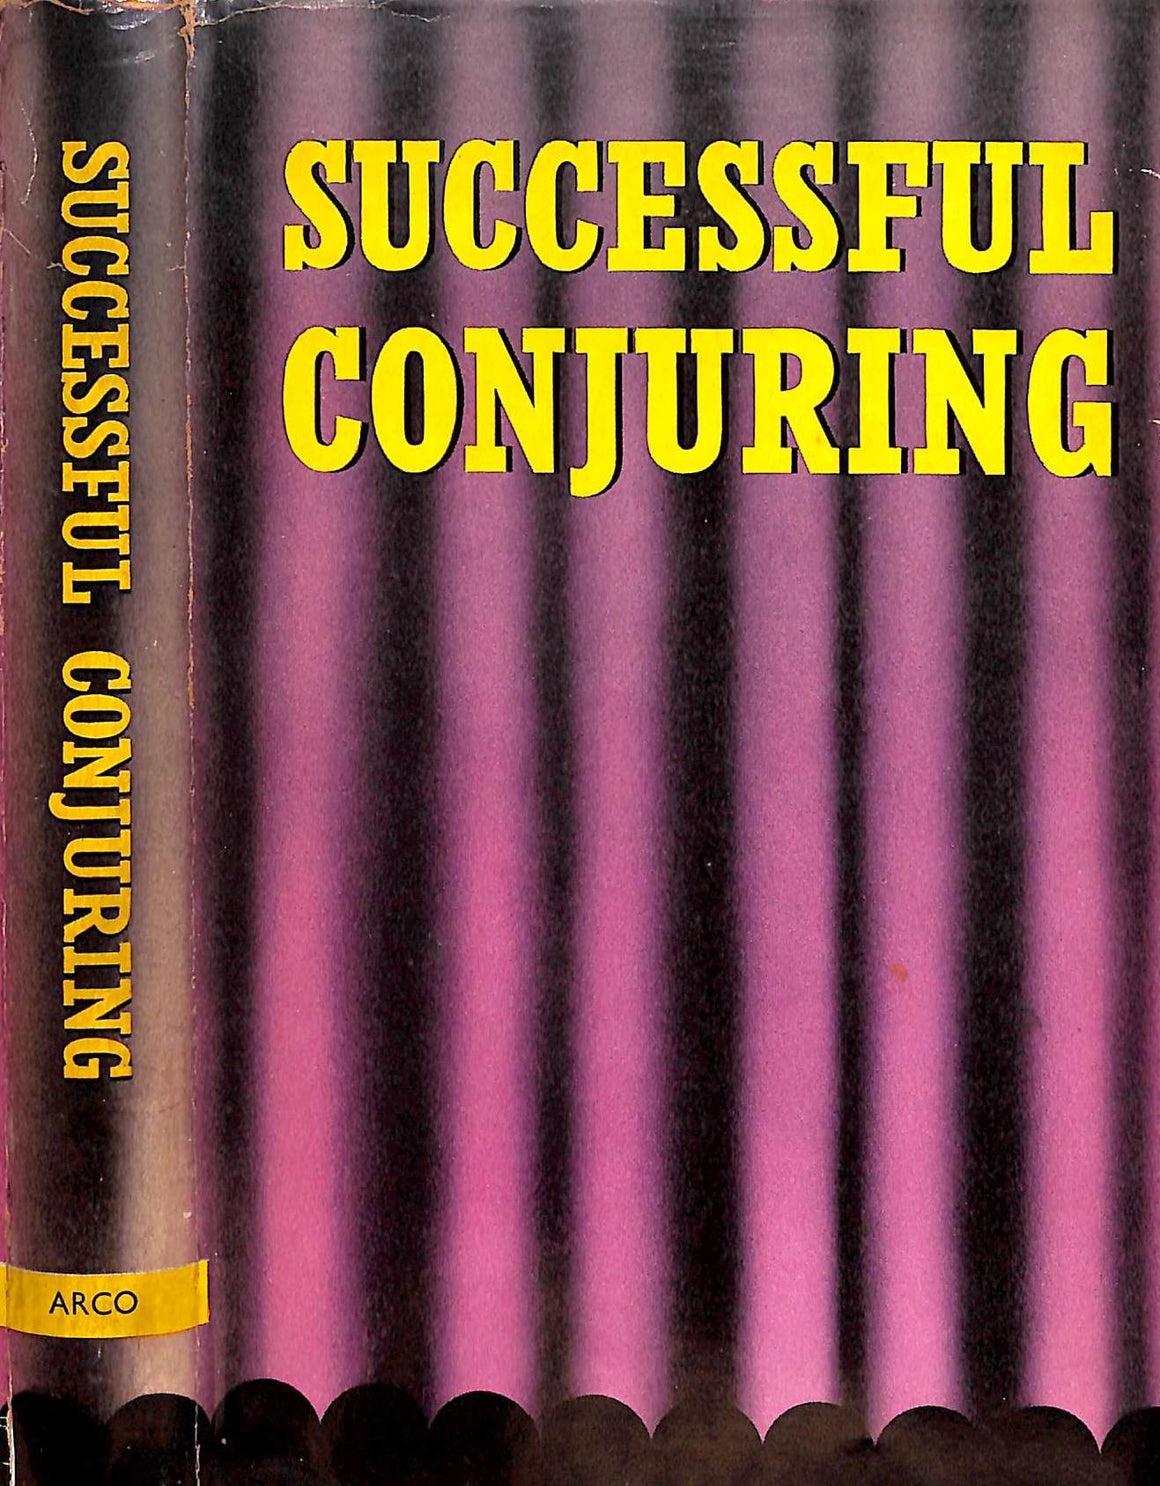 "Successful Conjuring" 1964 HUNTER, Norman